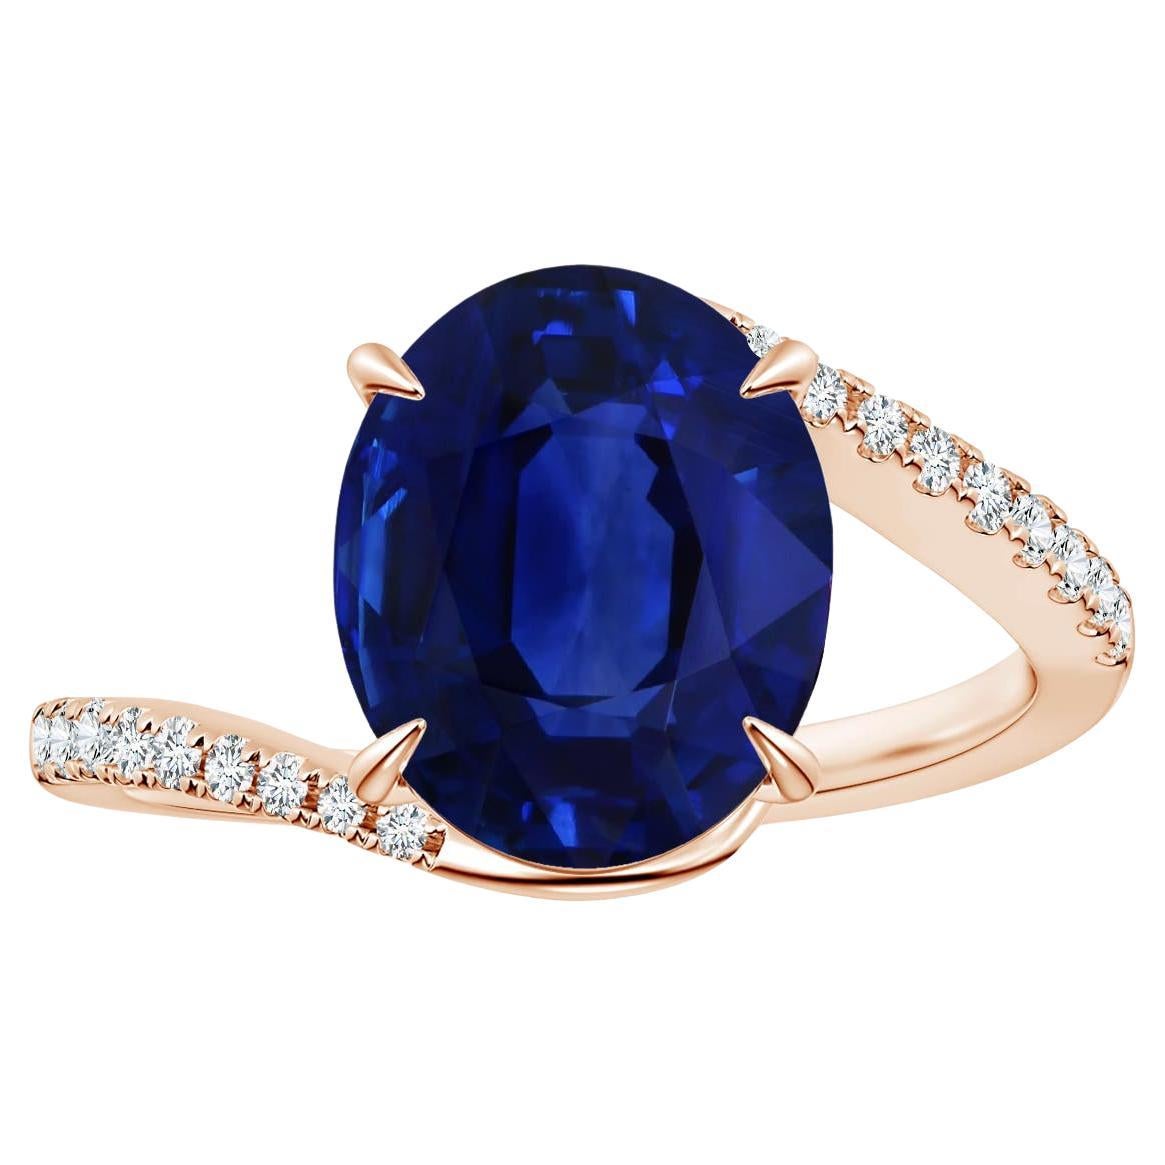 Angara Gia Certified Natural Blue Sapphire Ring in Rose Gold with Diamonds